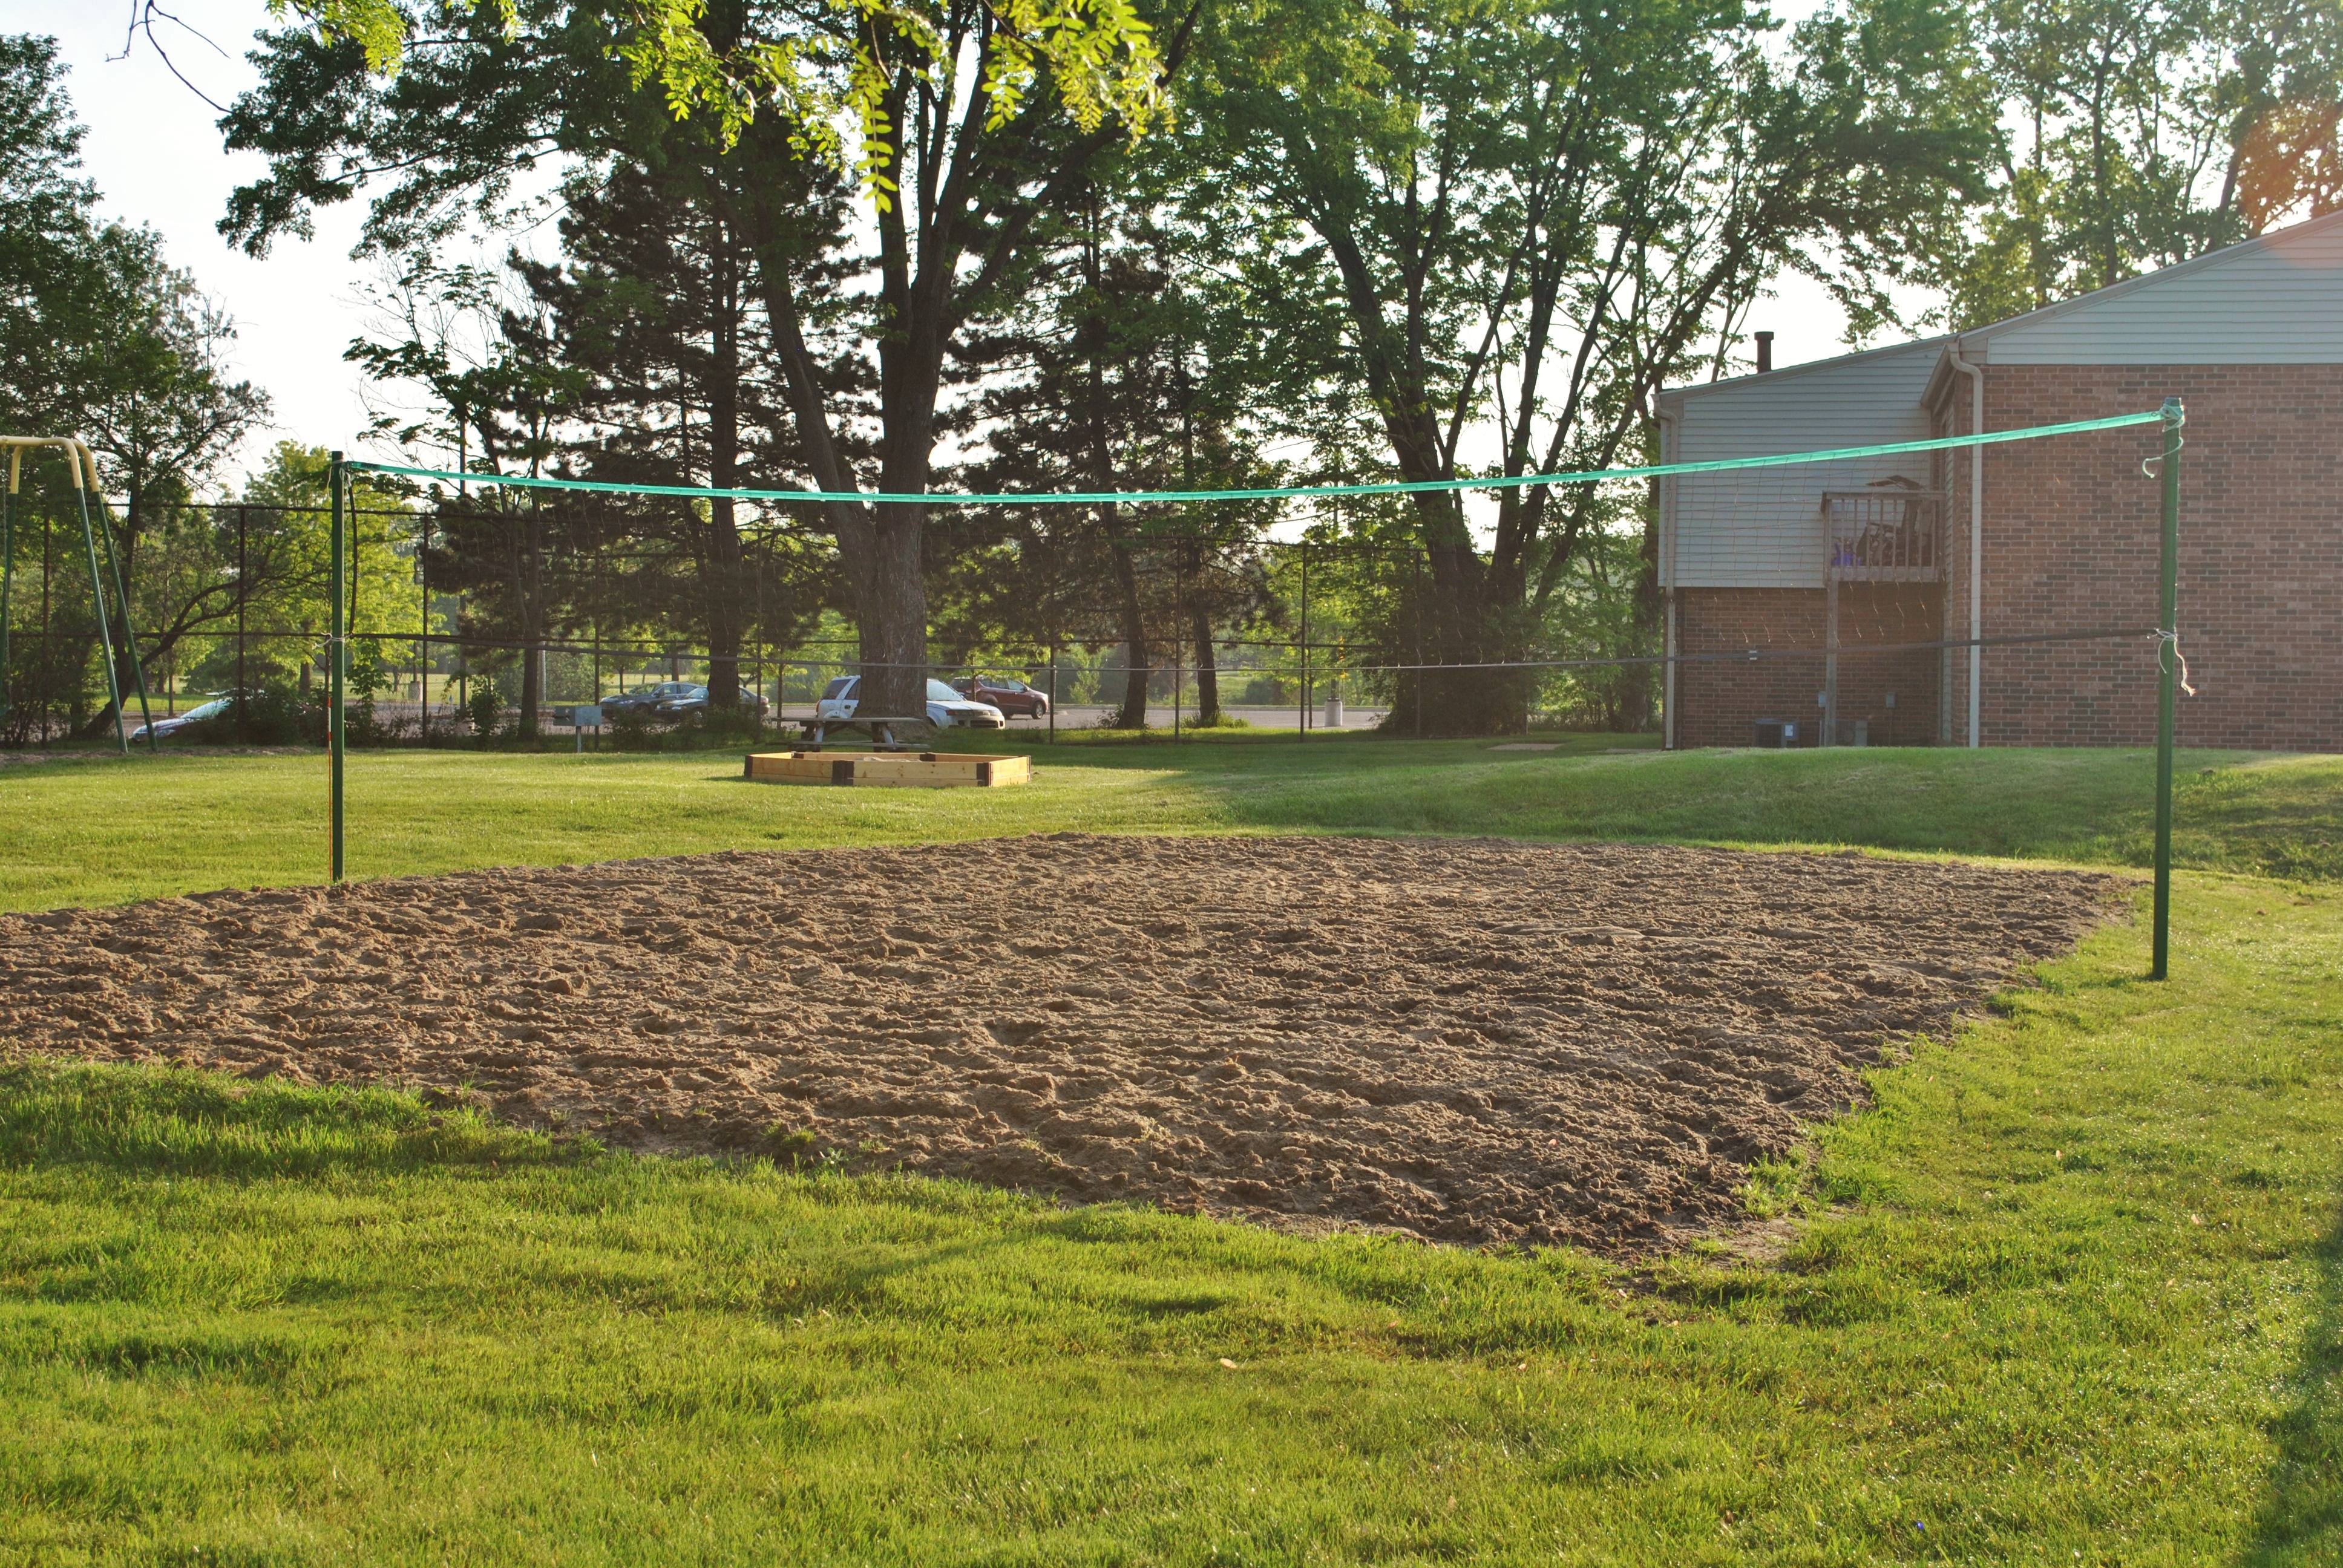 OUTDOOR VOLLEYBALL COURT at Fairway Club Apartments, located in prestigious Canton, MI